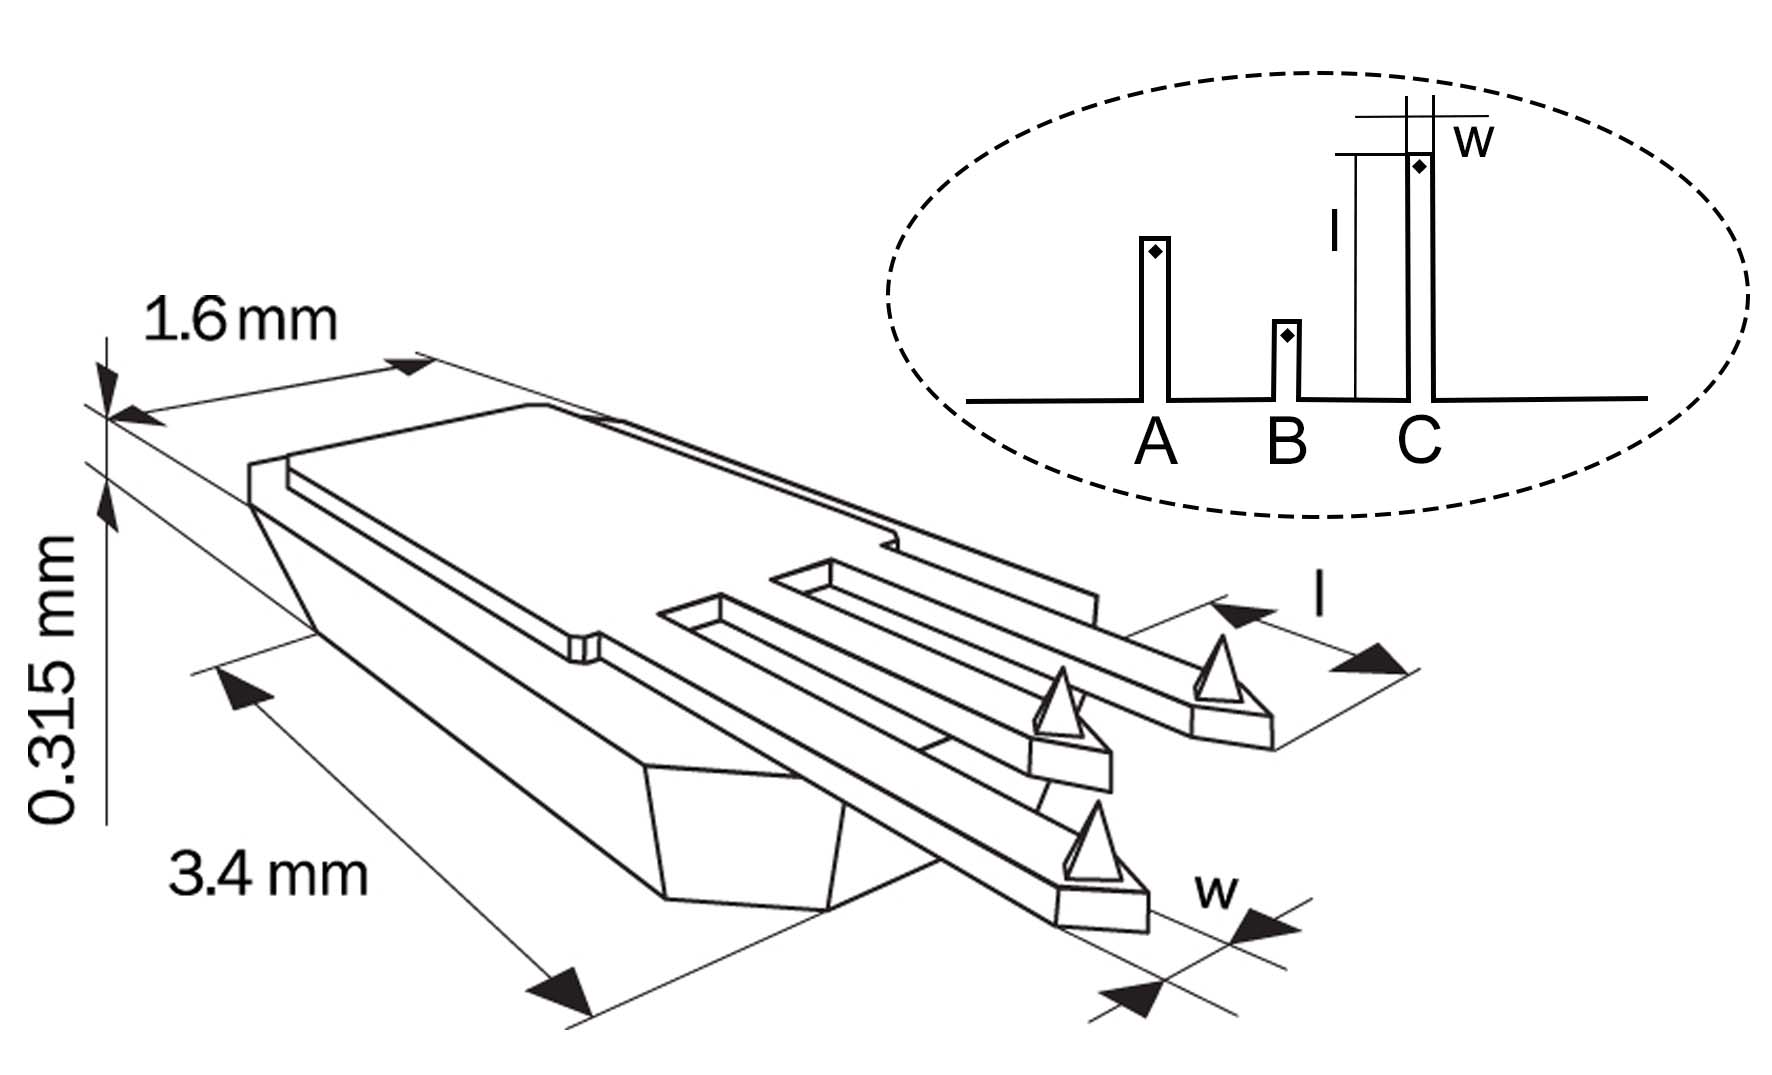 Schematic drawing of an AFM probe with three AFM cantilevers.